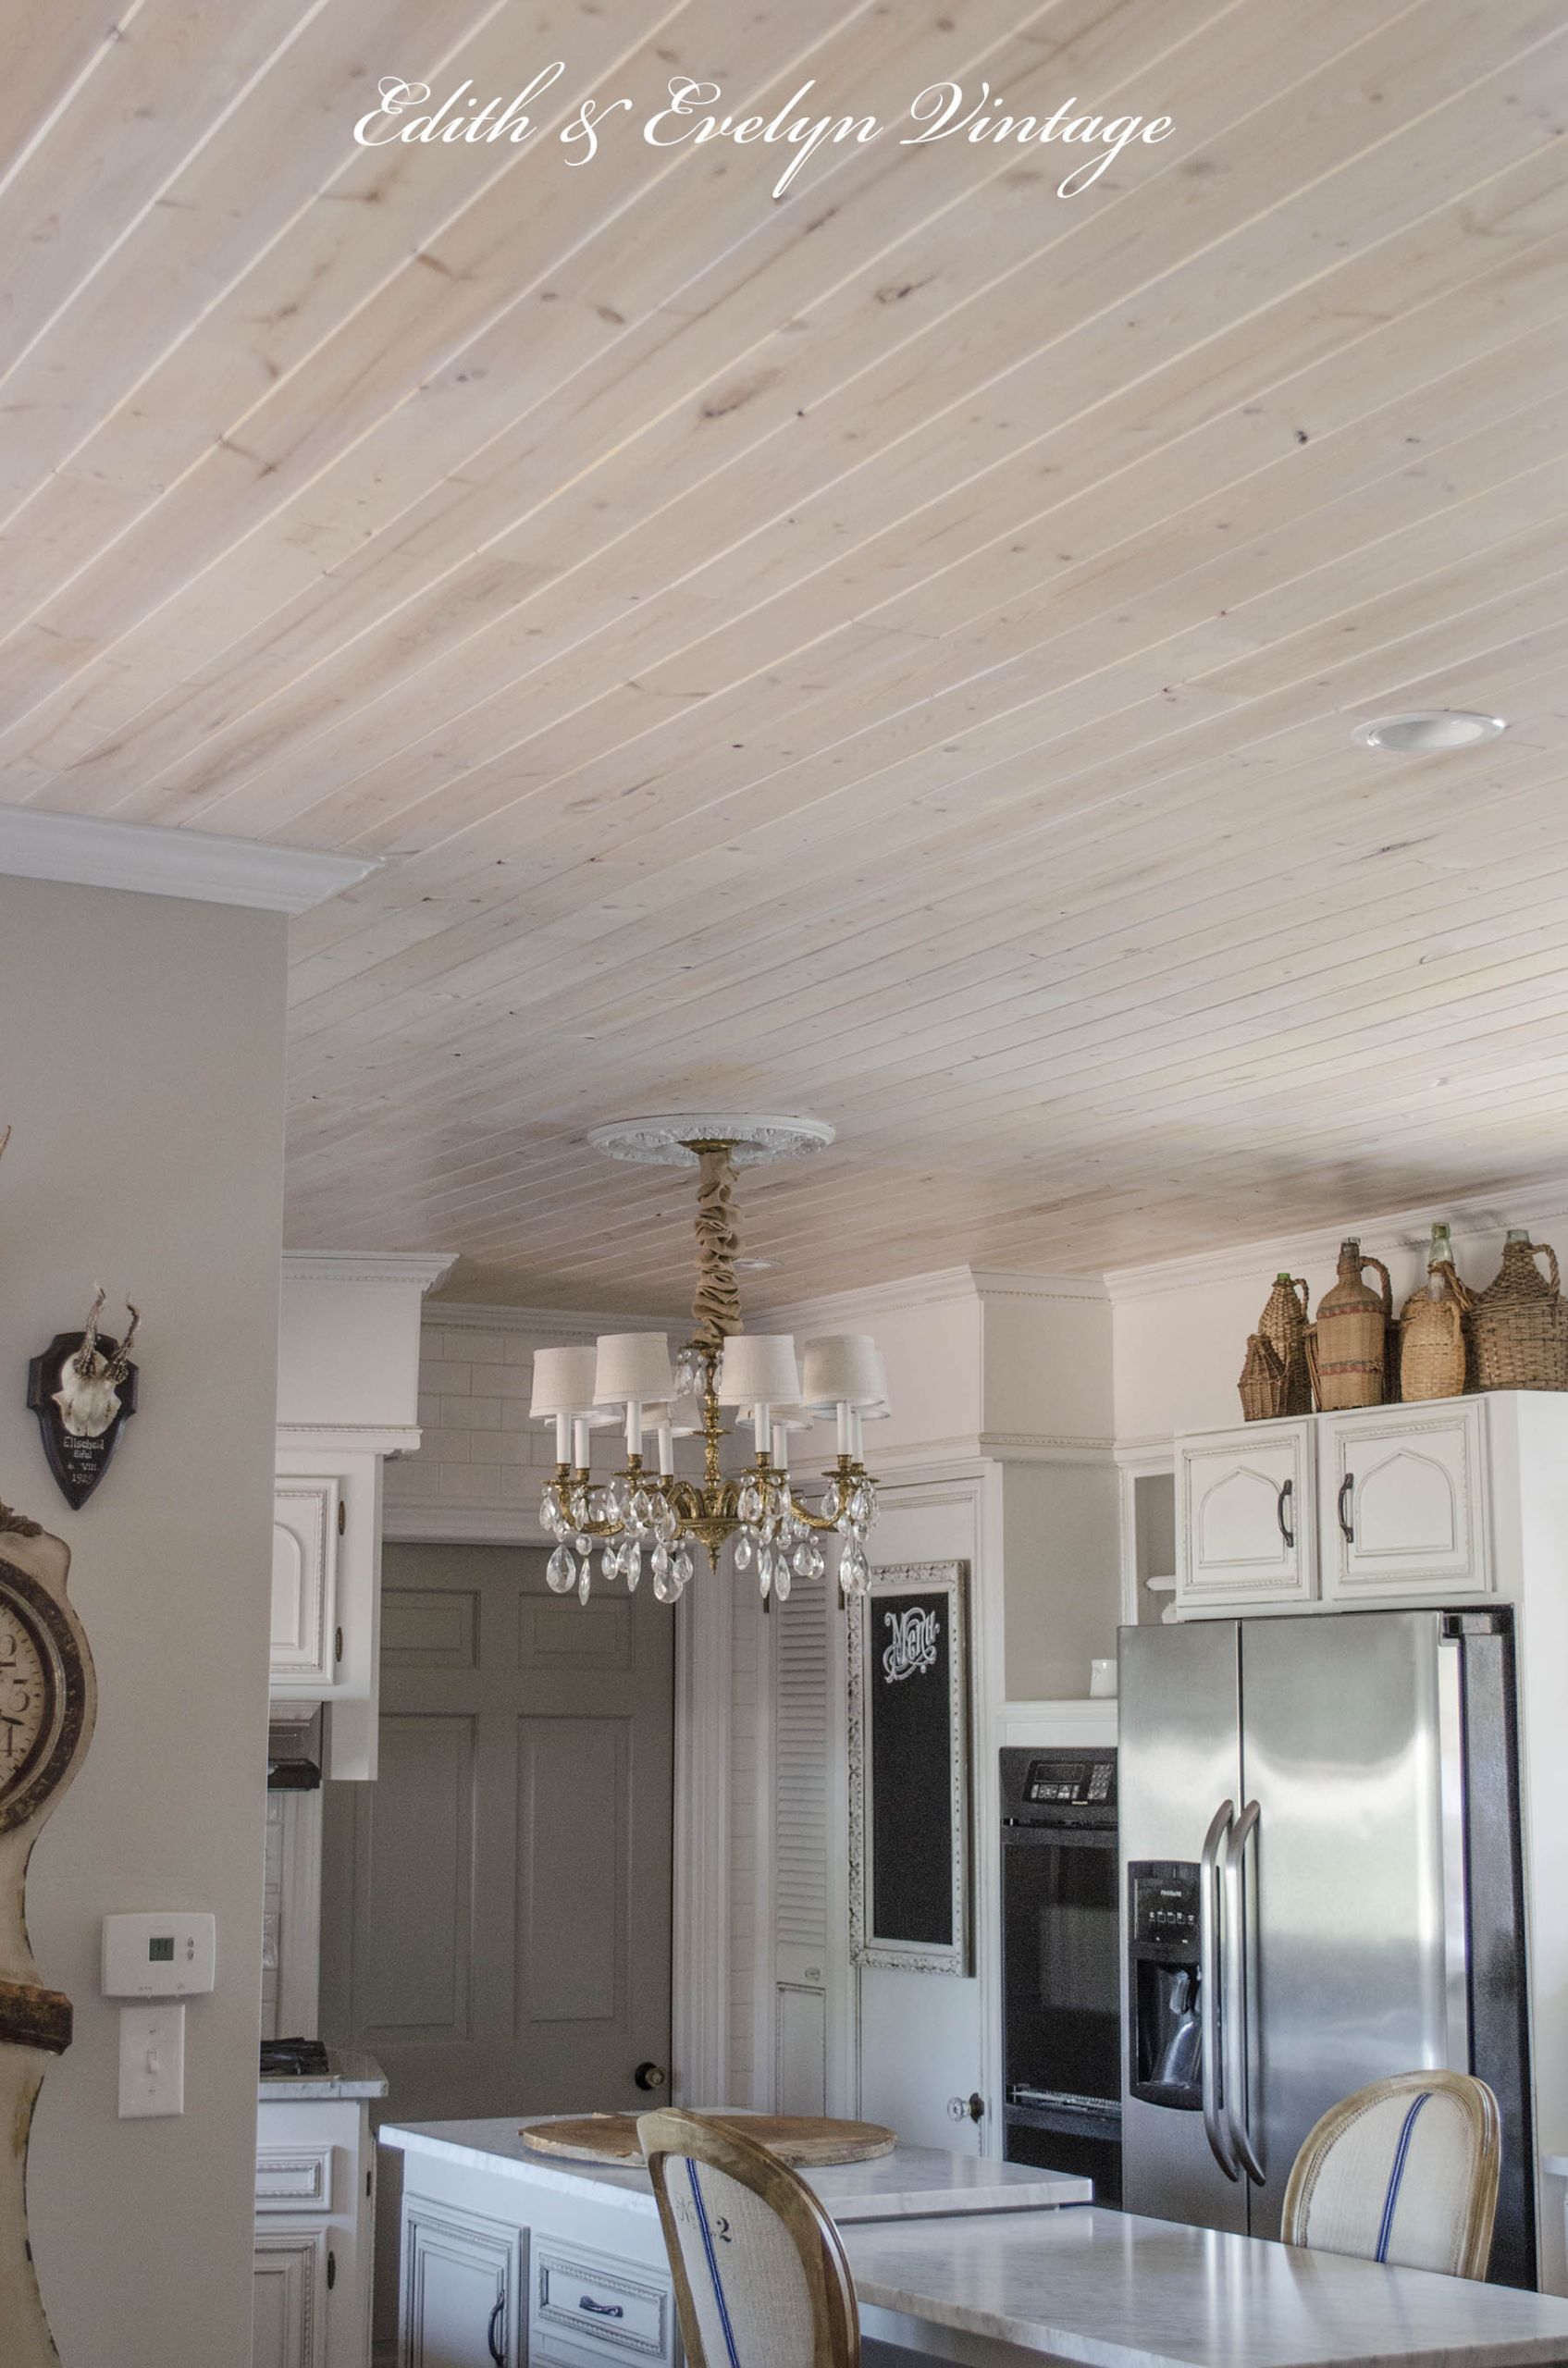 DIY Plank Ceiling
 How to Plank a Popcorn Ceiling